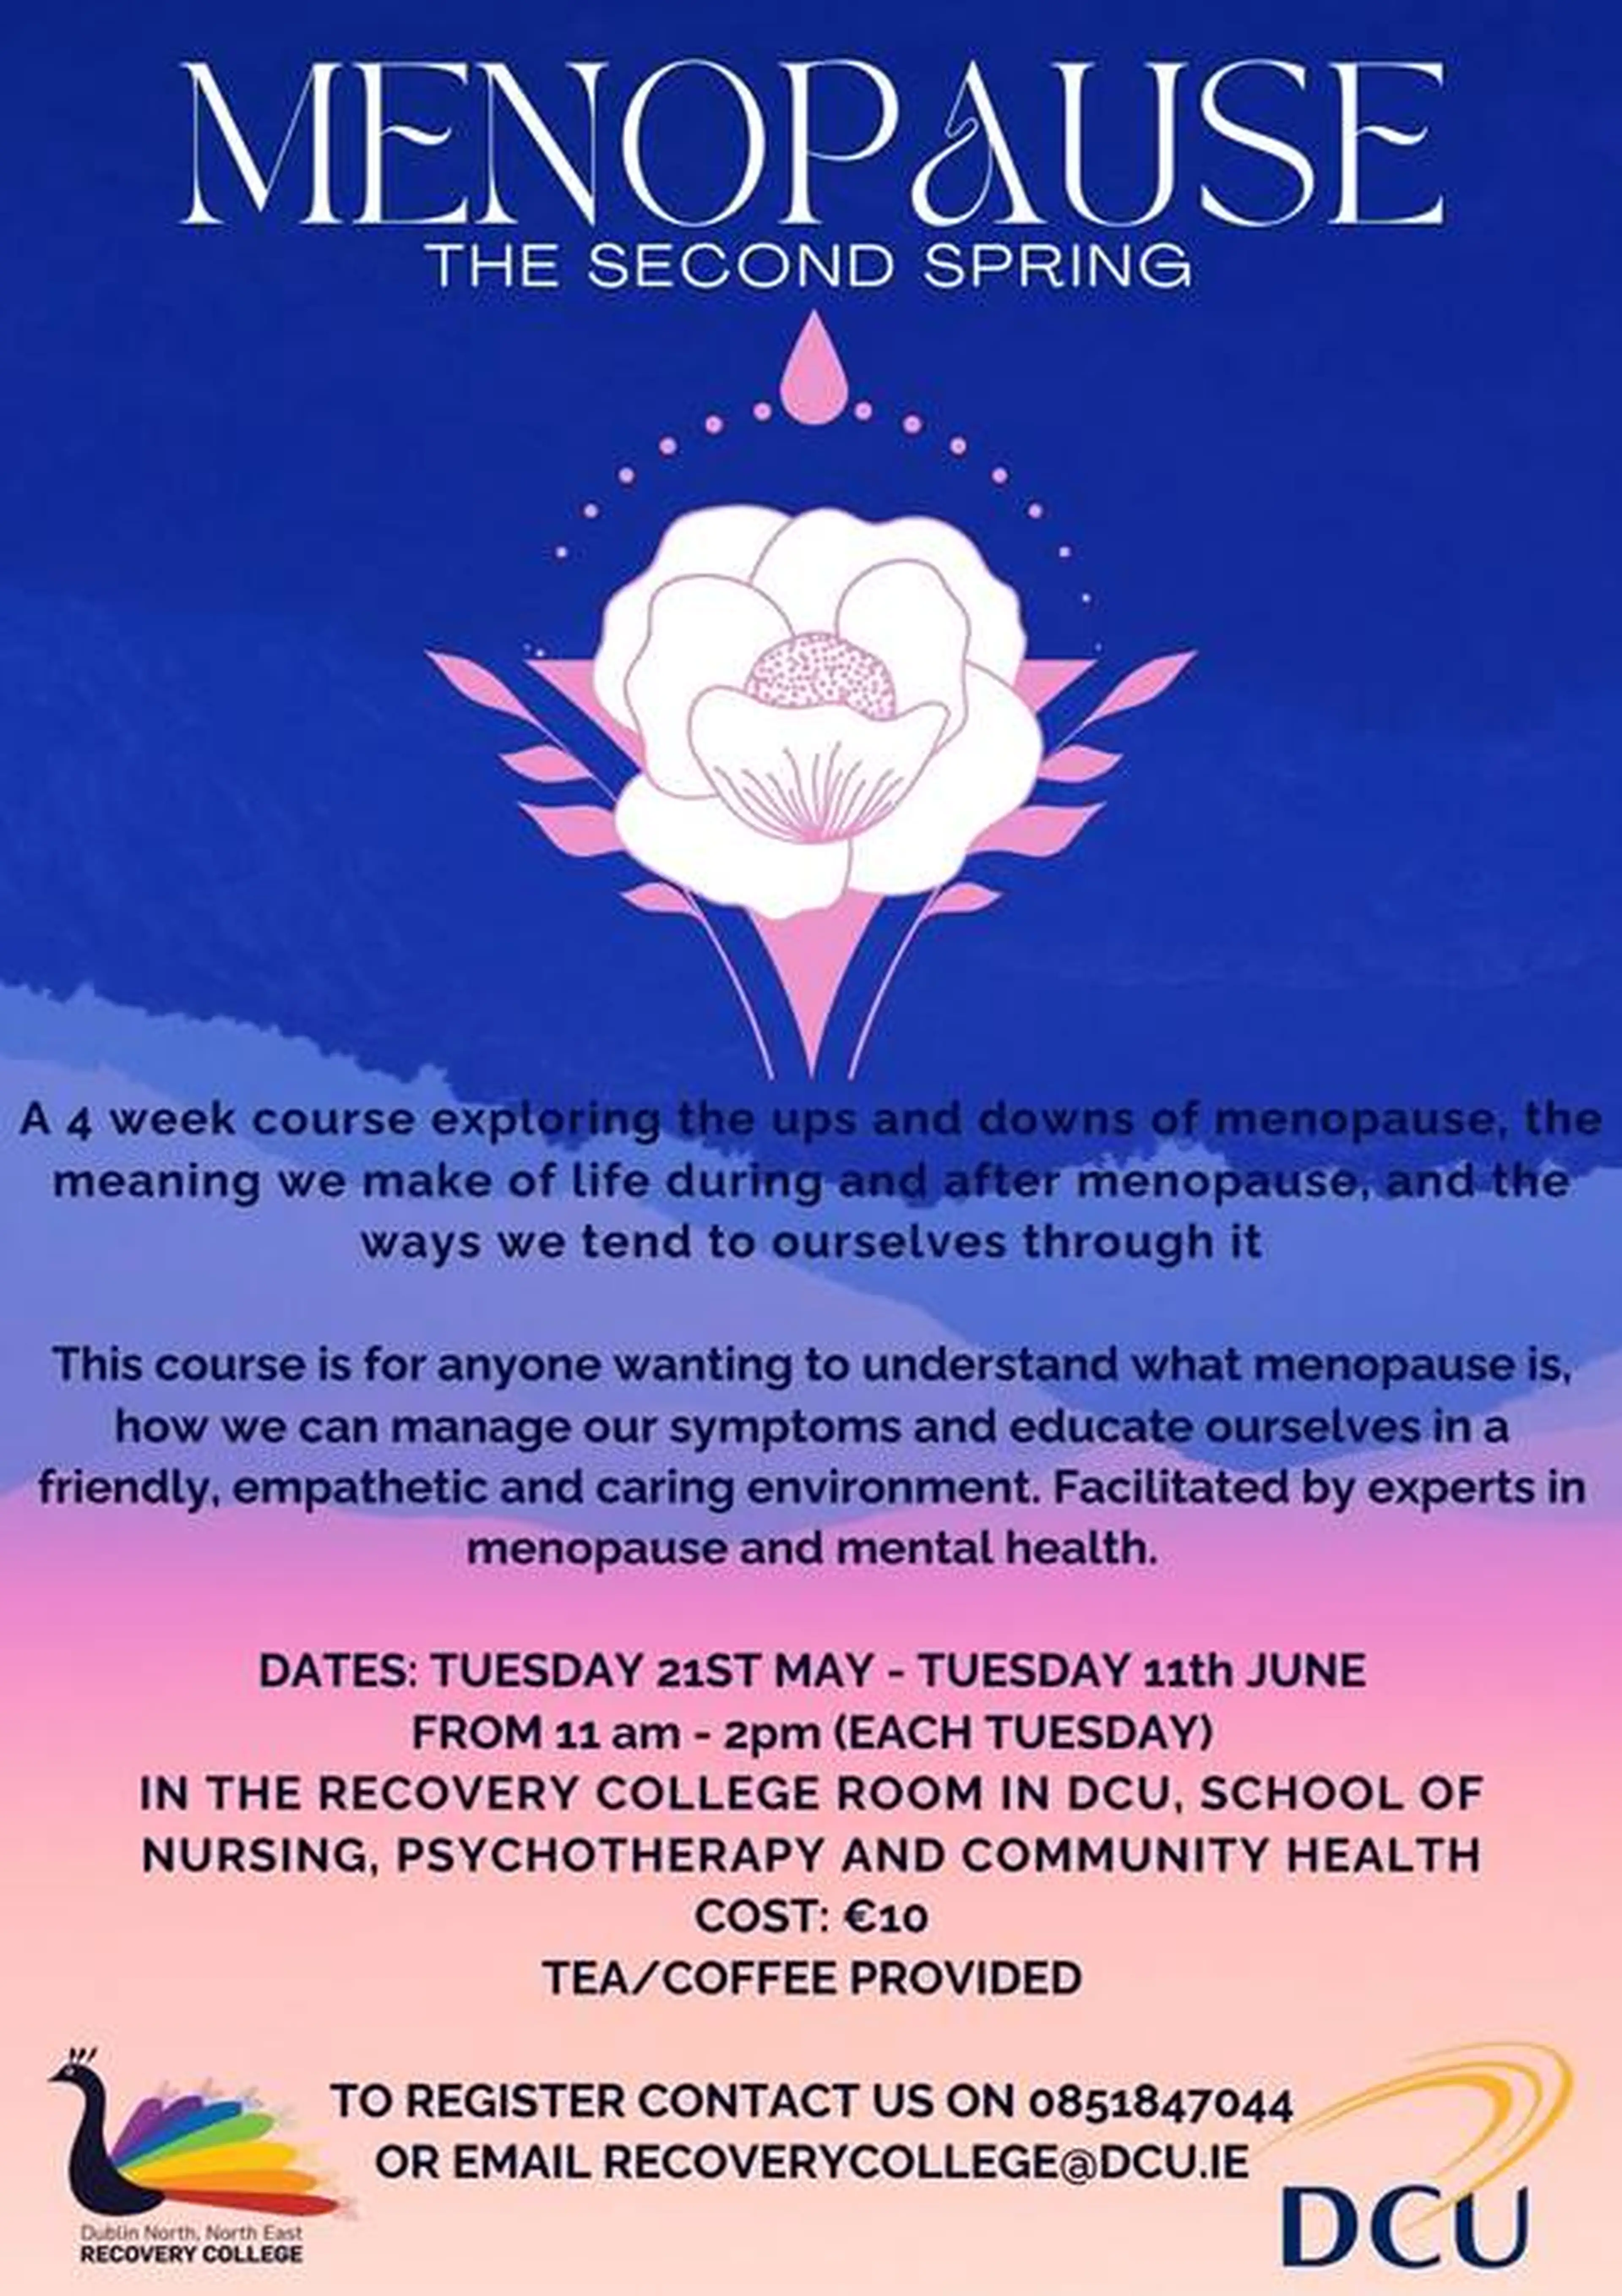 Menopause, The Second Spring Course